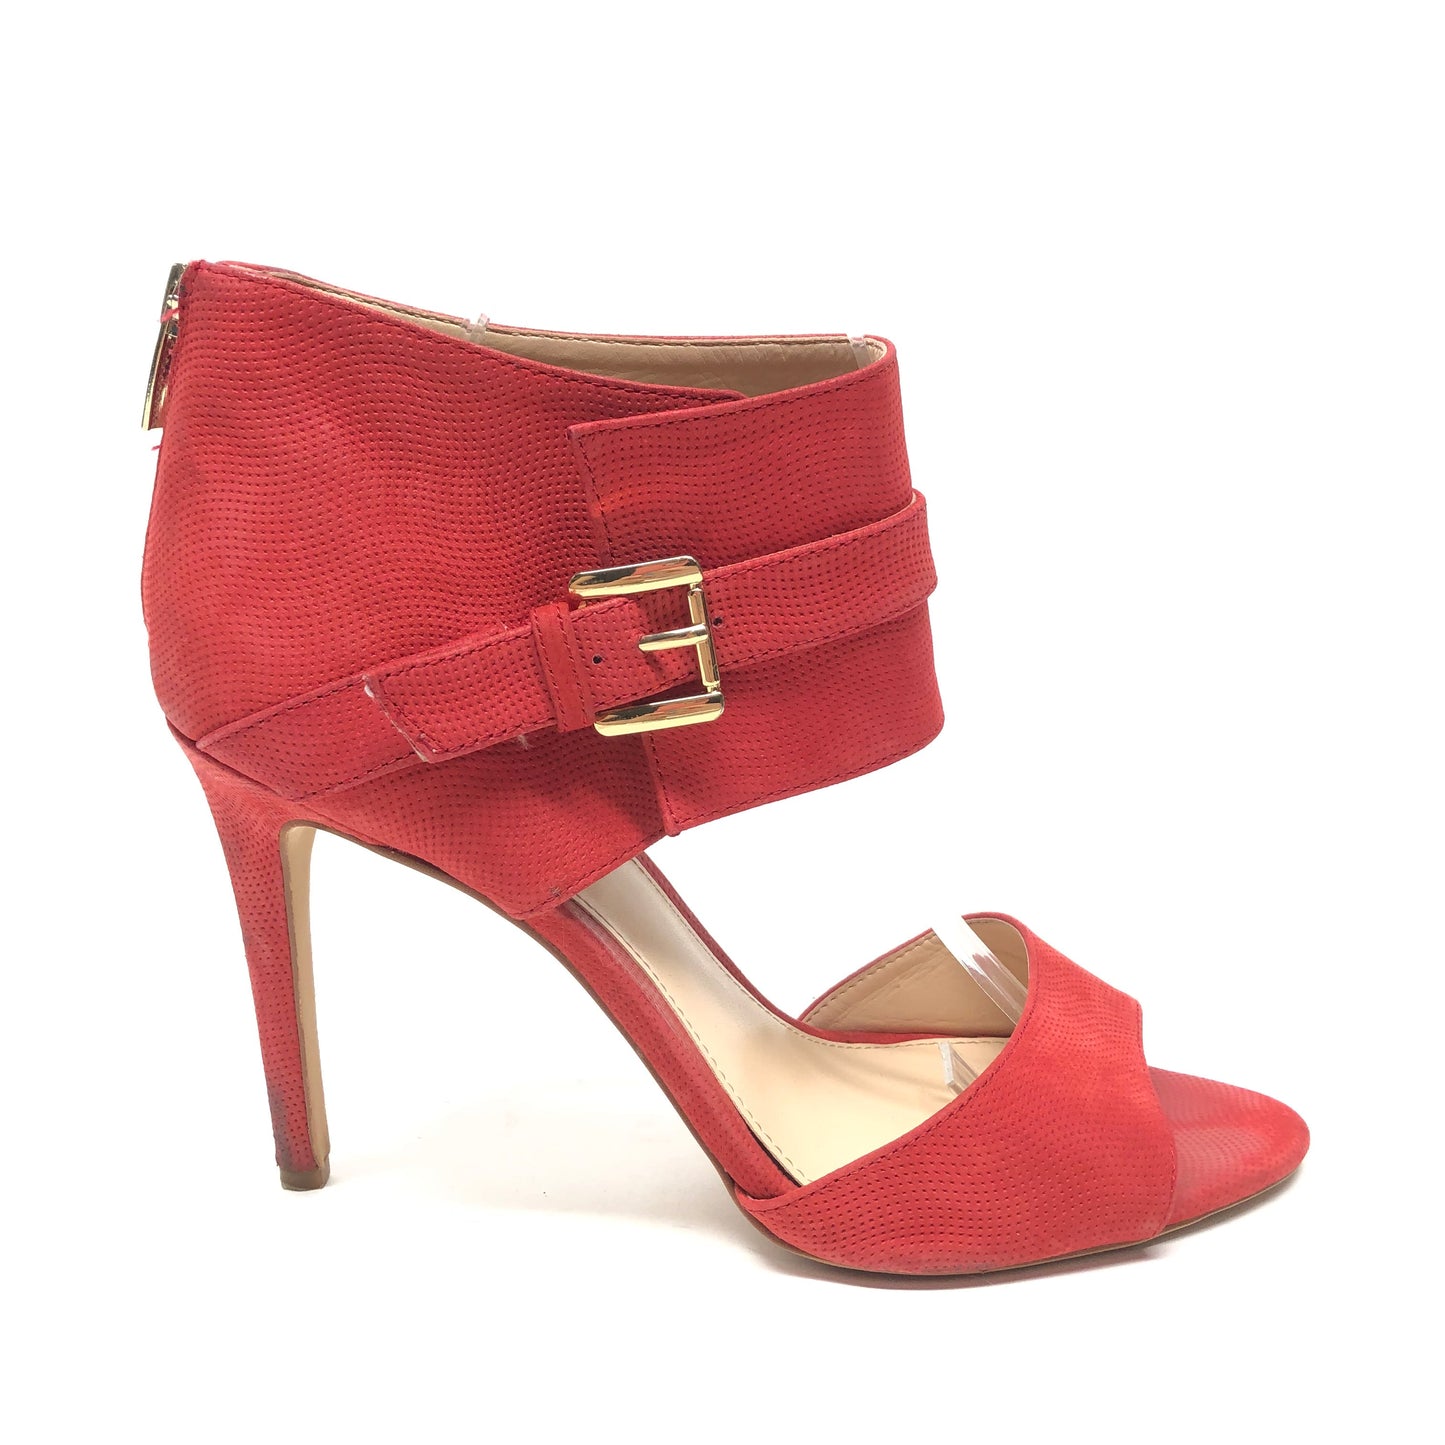 Red Sandals Heels Stiletto Vince Camuto, Size 10